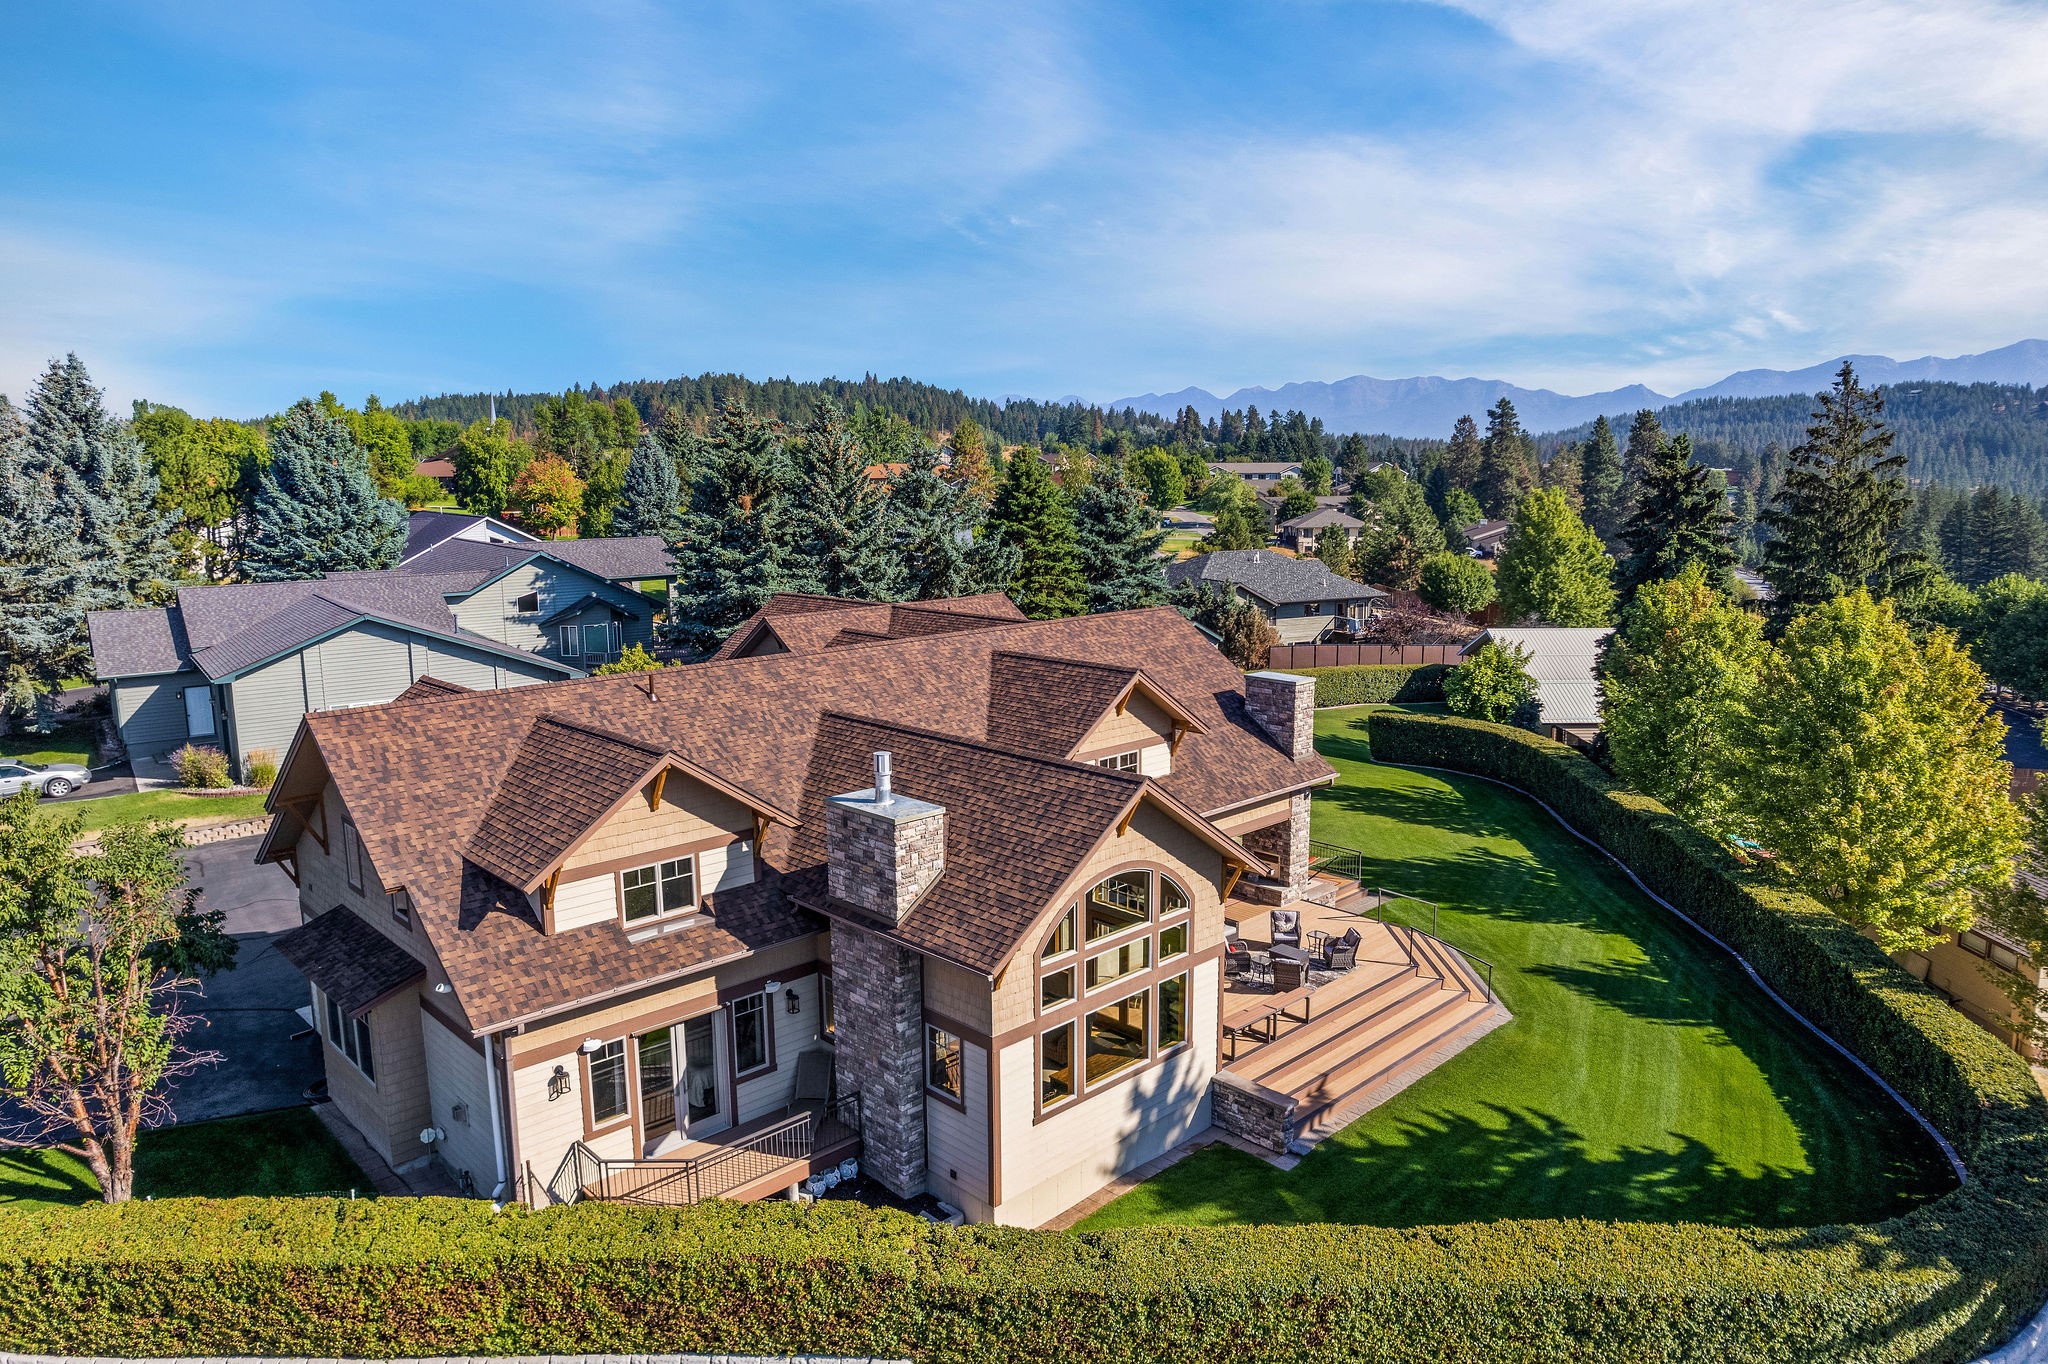 Introducing a Montana masterpiece w/ breathtaking Swan Mtn/Flathead Lake views! This extensively upgraded custom home on 1.15 acres boasts a spacious 6BD/7BA layout across 5,037 SF of living space, highlighting a main level living concept. New roof in 6/23! Immerse yourself in the warm ambiance created by the quality craftsmanship throughout! Indulge your culinary passions in the grand chef’s kitchen, complemented by a generous dining area that's perfect for gatherings. The covered entertainment/BBQ area, complete w/ its own fireplace, sets the stage for unforgettable outdoor evenings. Outside lies a meticulously landscaped yard w/ high-end privacy fencing, providing seclusion & peace. Park your boat/RV by the 1,404 SF shop w/ lots of storage/workspace. Stroll to the artisan village of Bigfork, where local shops & restaurants await. Flathead Lake's public beach/boat launch just minutes away. See Feature Sheet in docs. Call Jennifer Shelley 406.249.8929 or your real estate professional.